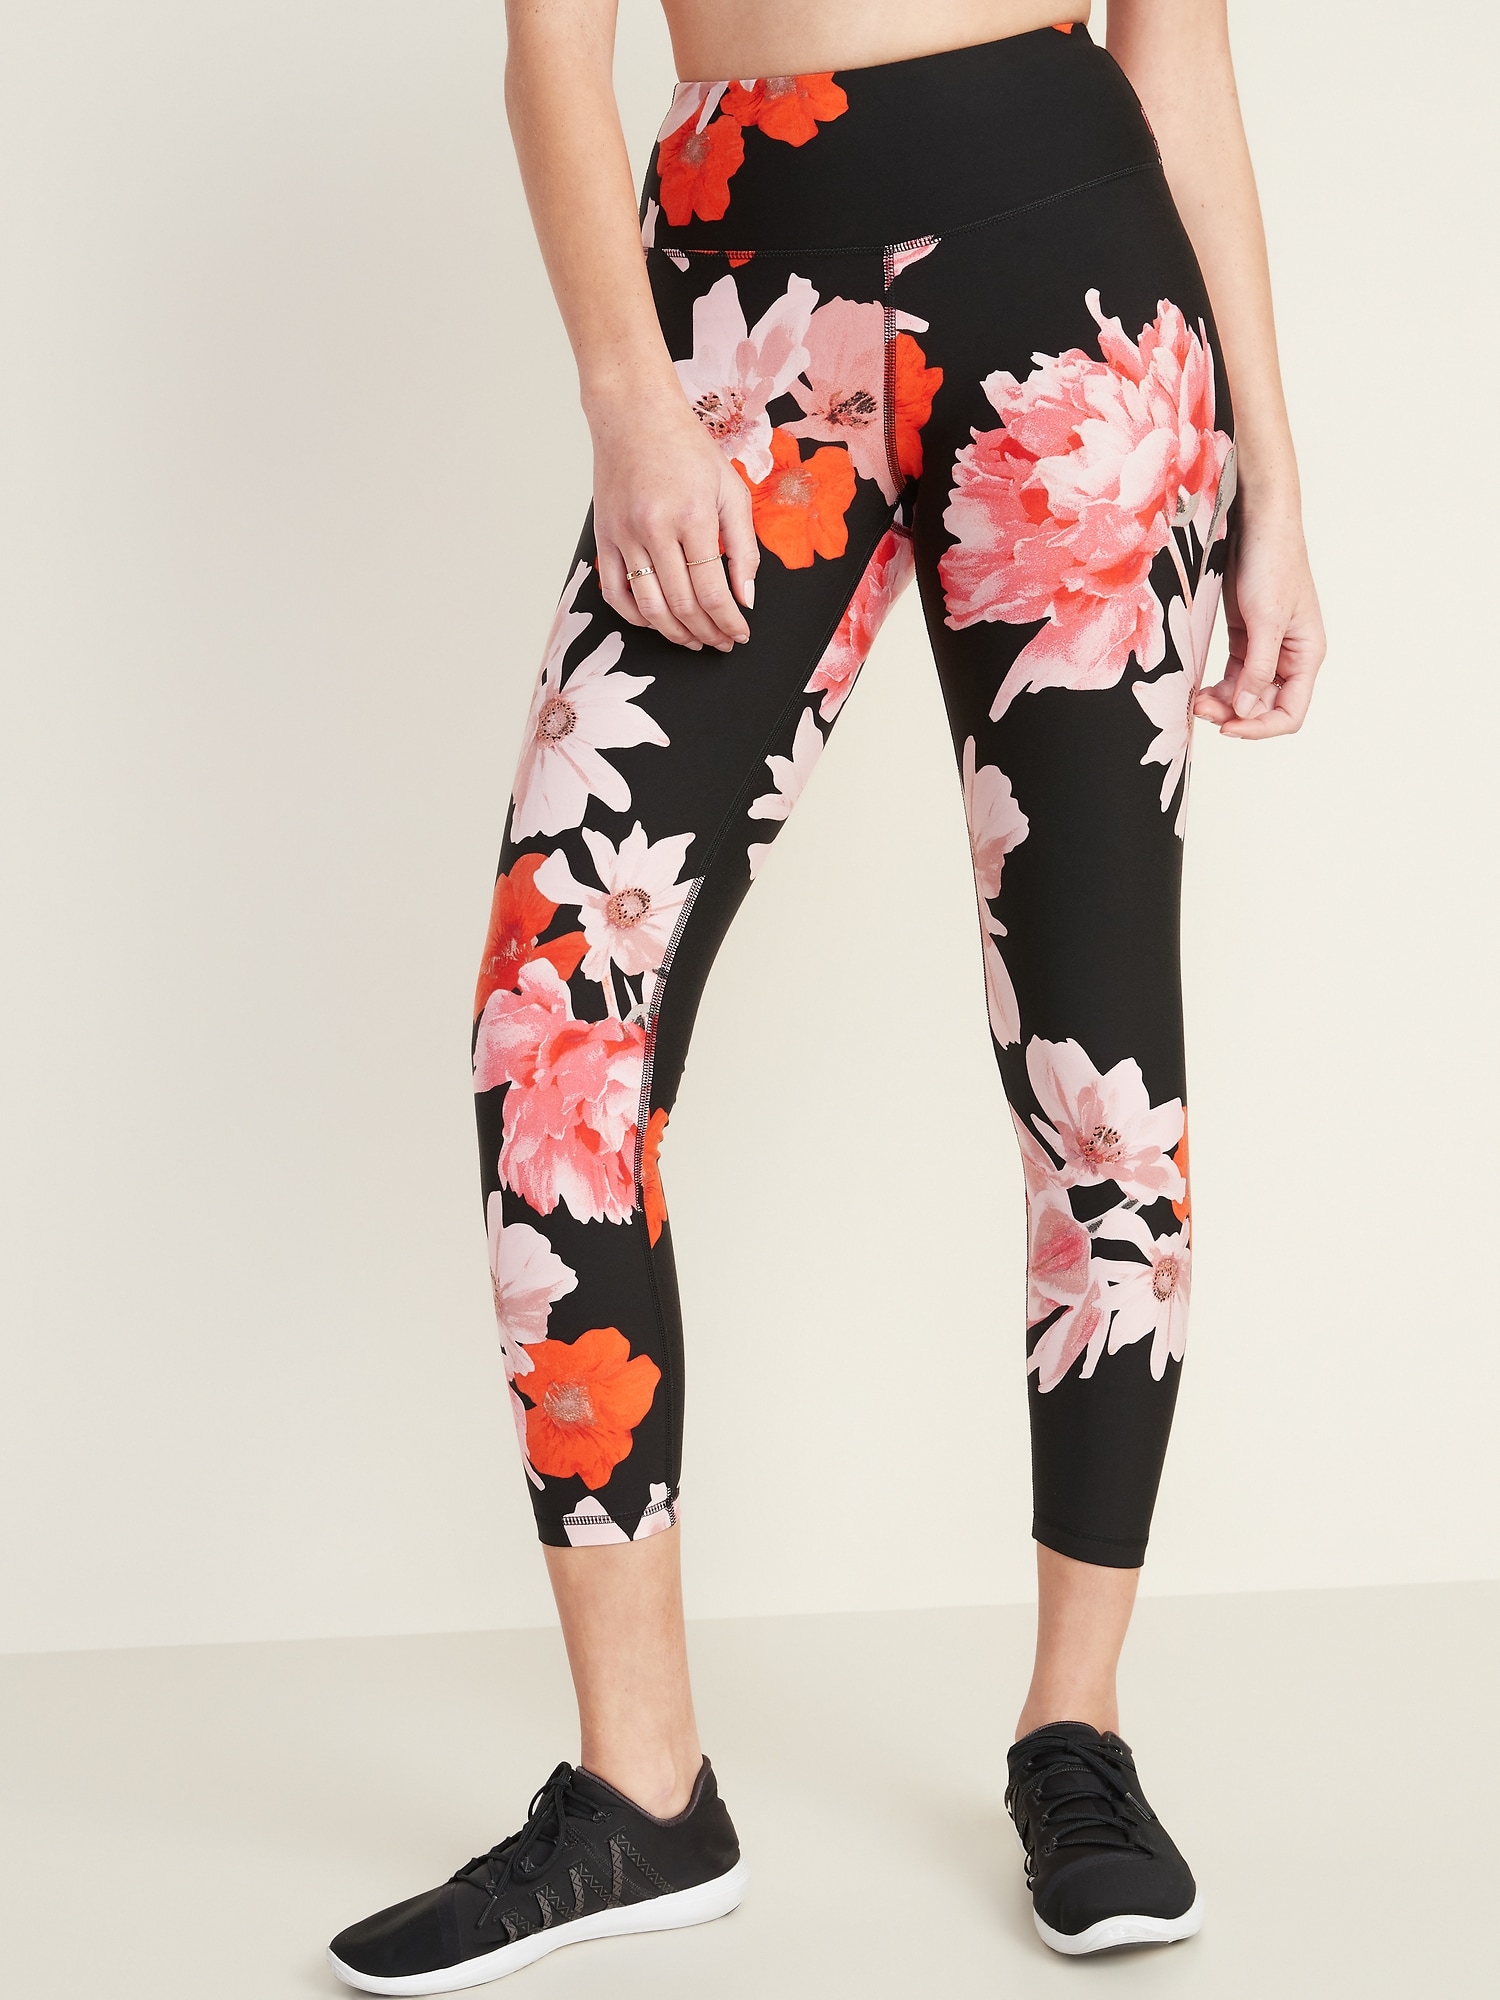 Old Navy NWT FLORAL 7/8 LEGGINGS Size L - $25 New With Tags - From Justine